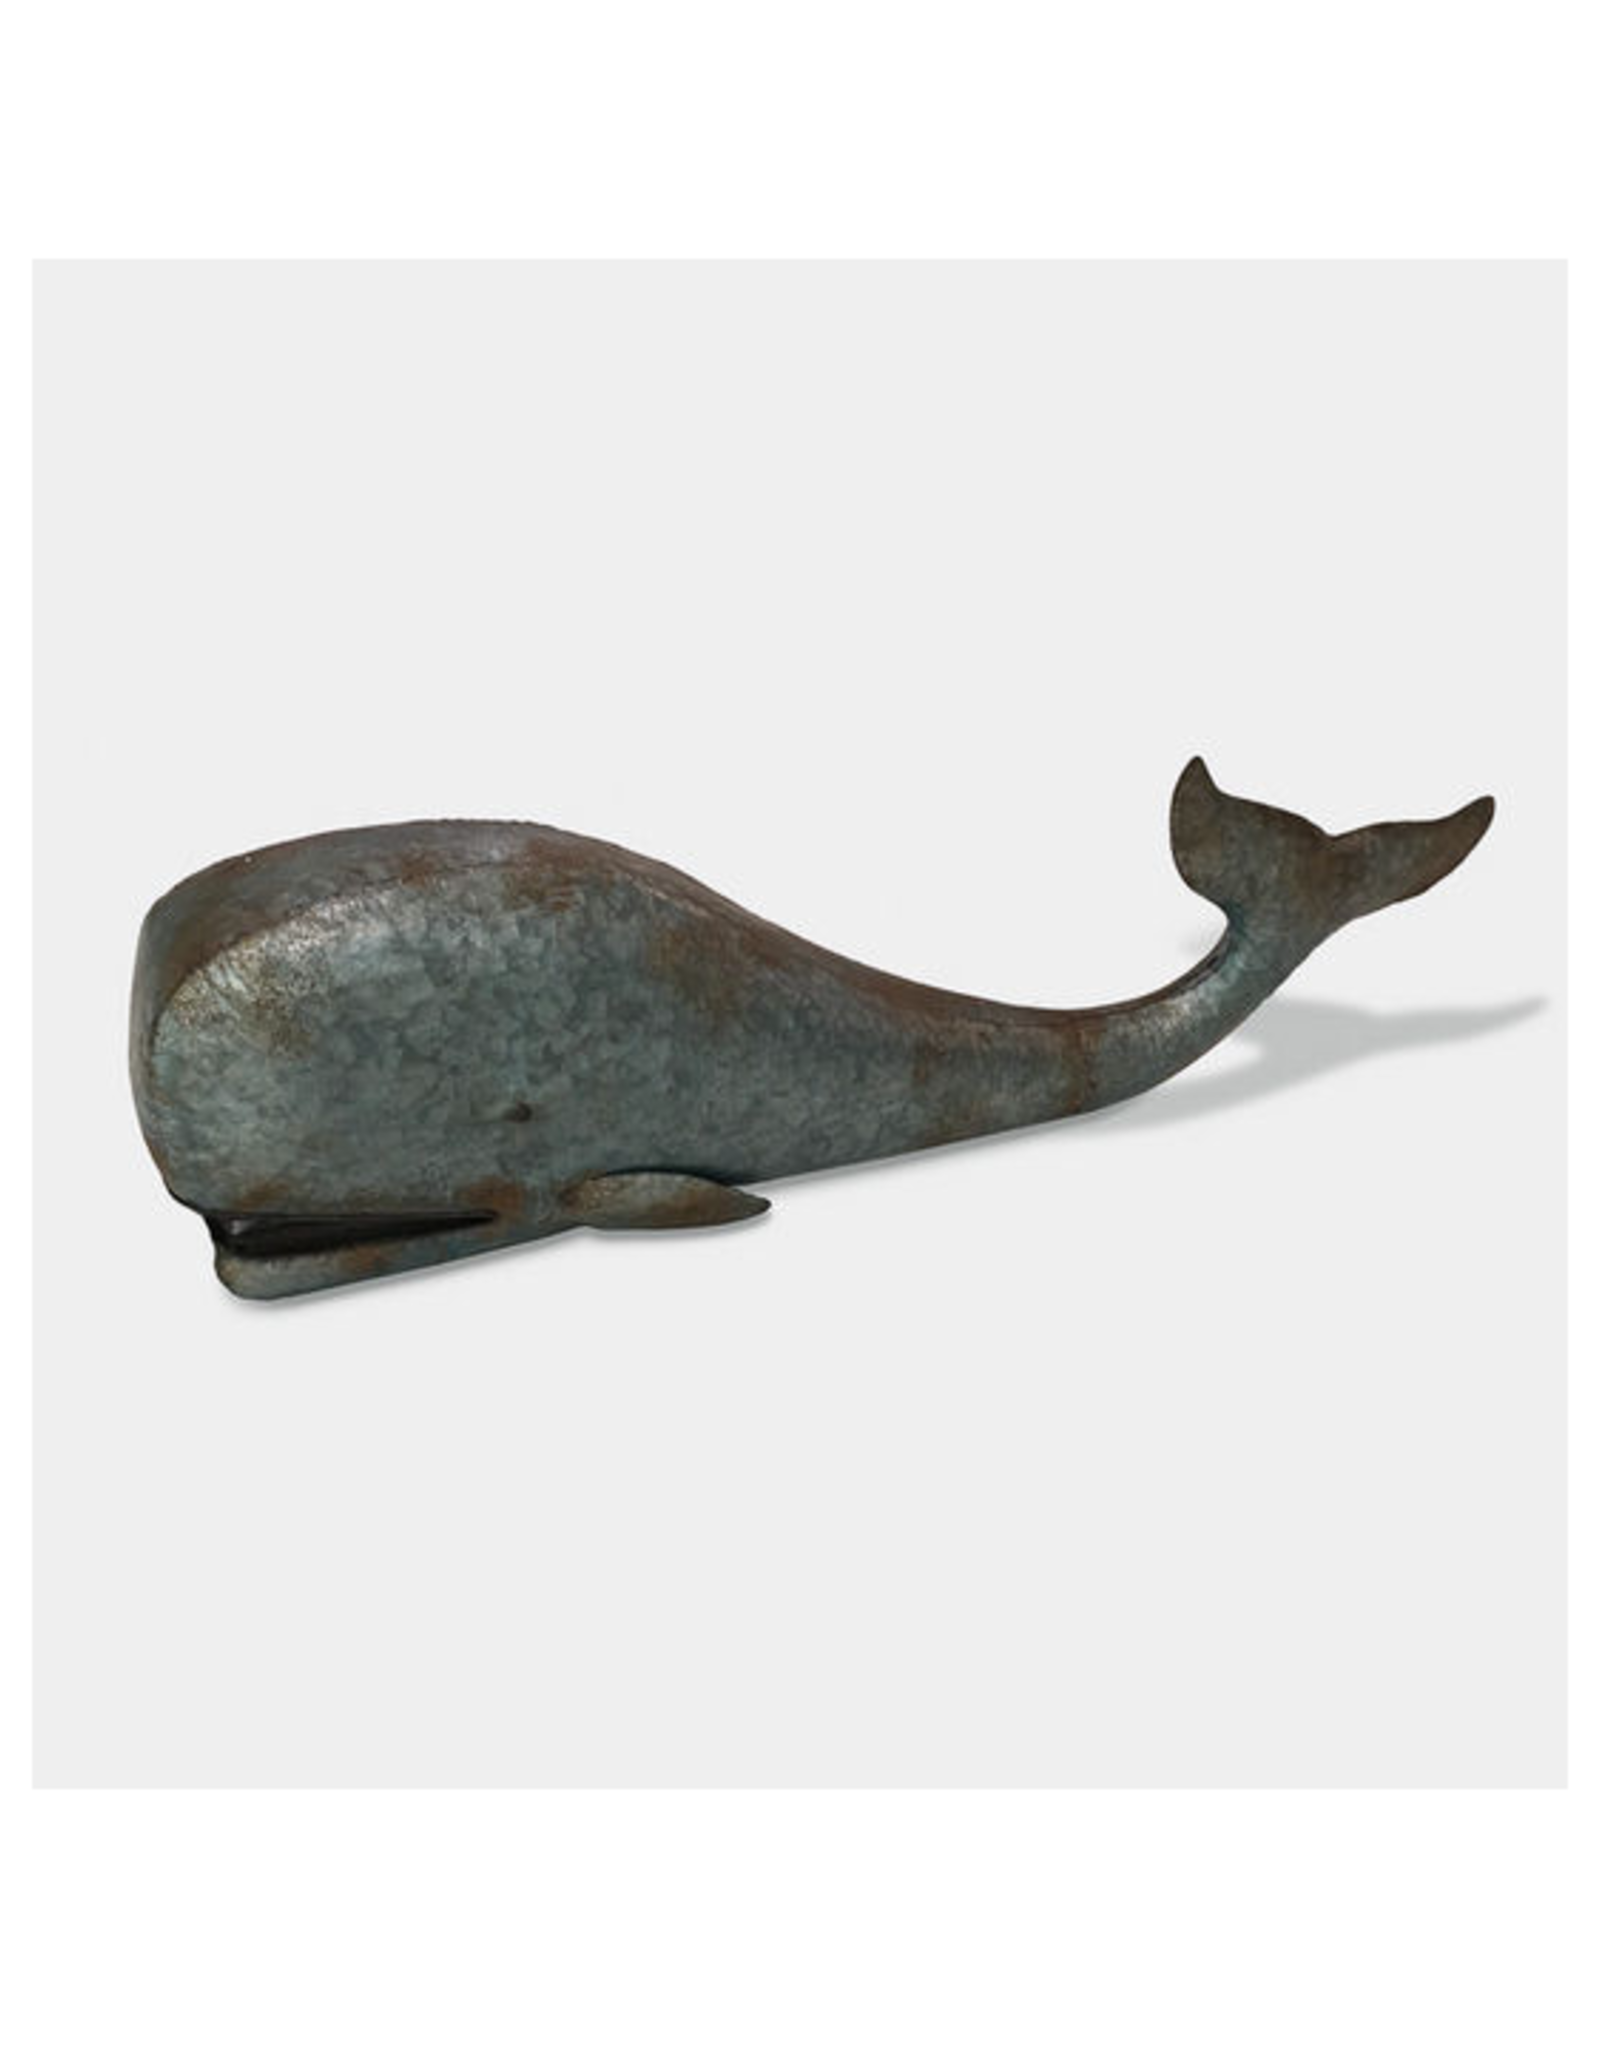 Large Patina Metal Whale - Curbside Pick Up Only!